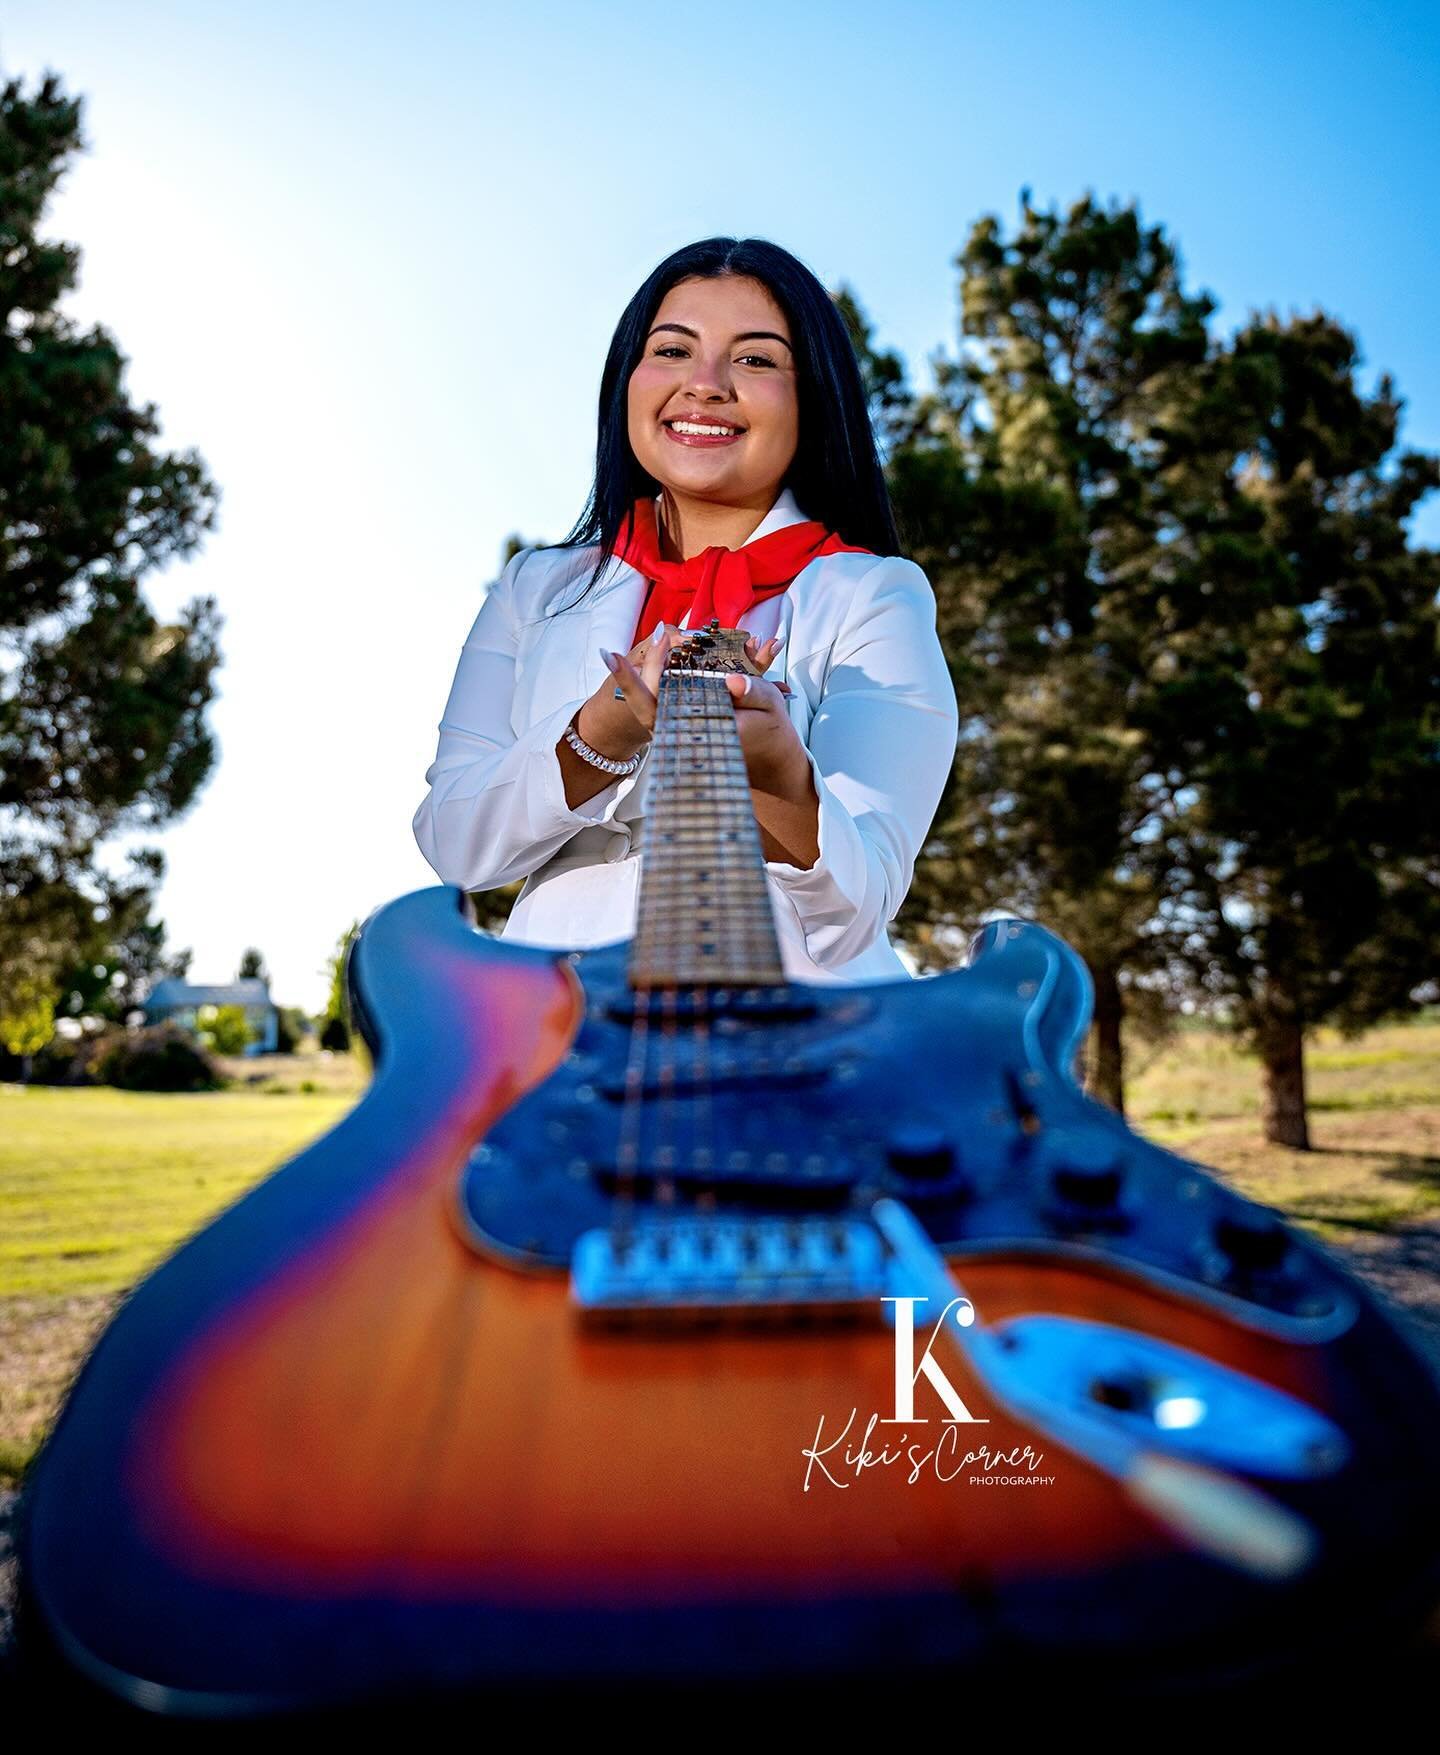 🎶I&rsquo;m all shook up (couldnt resist) From Raven&rsquo;s Class of &lsquo;24 Session last night.  She&rsquo;s a big Elvis fan so I grabbed one of our guitars for this image.  So fun! 
.
.
.
#elvisfan #guitar #classof2024 #seniorsession #shineon